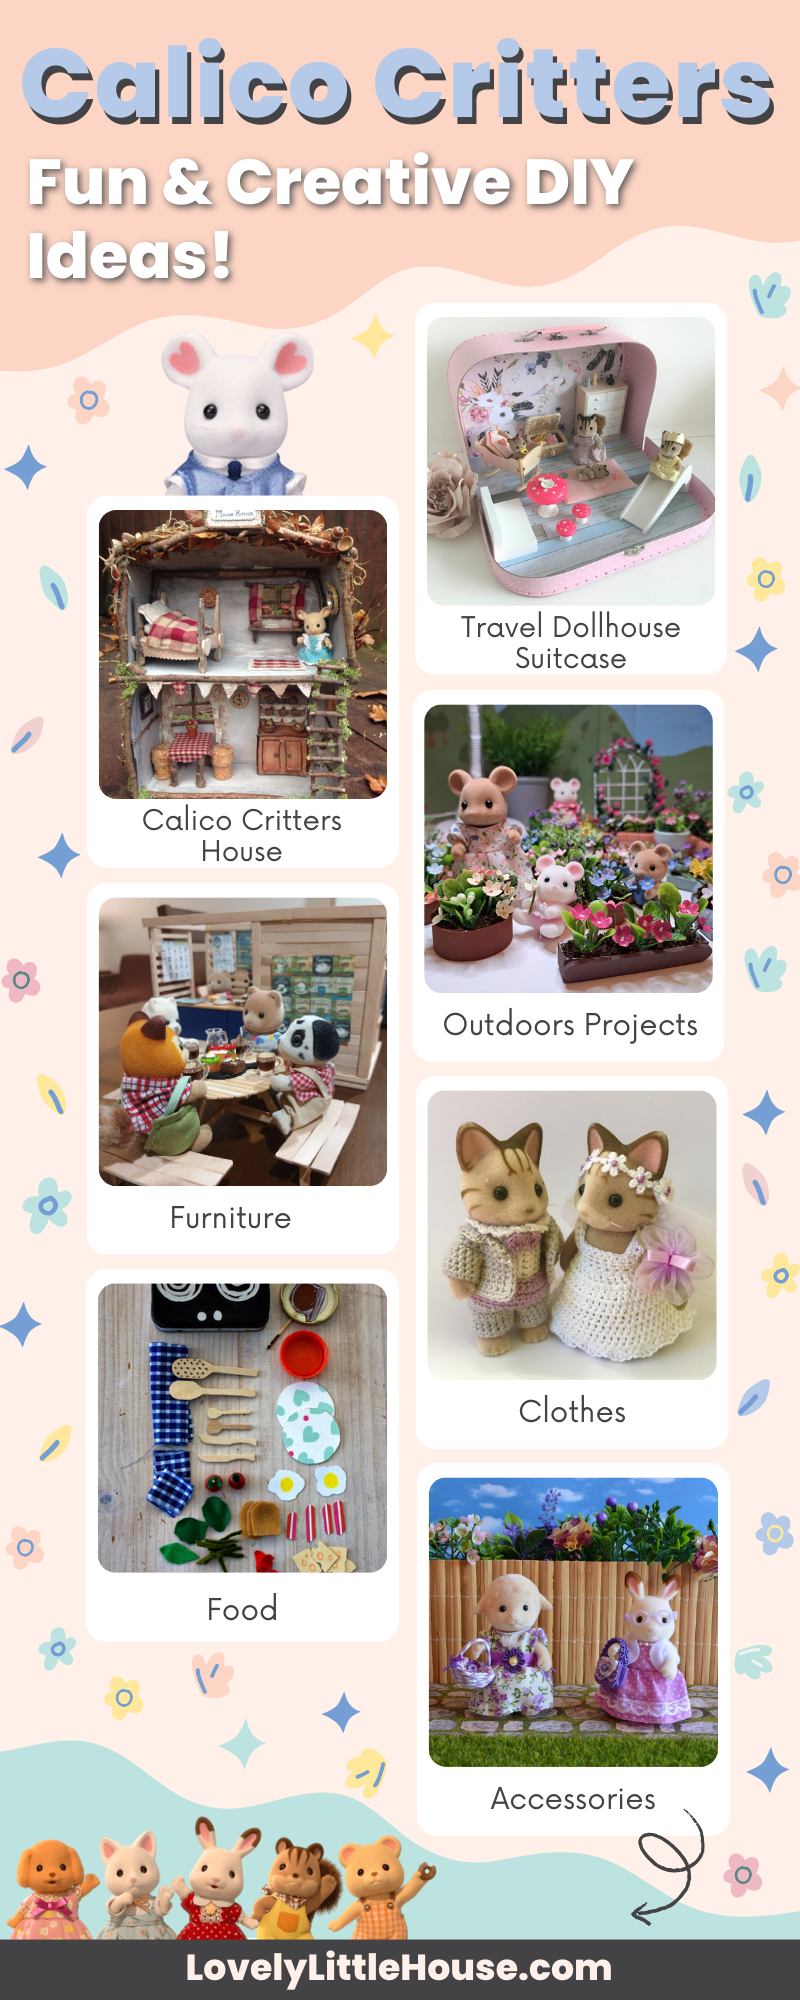 Infographic on Fun and Creative DIY Calico Critters Ideas